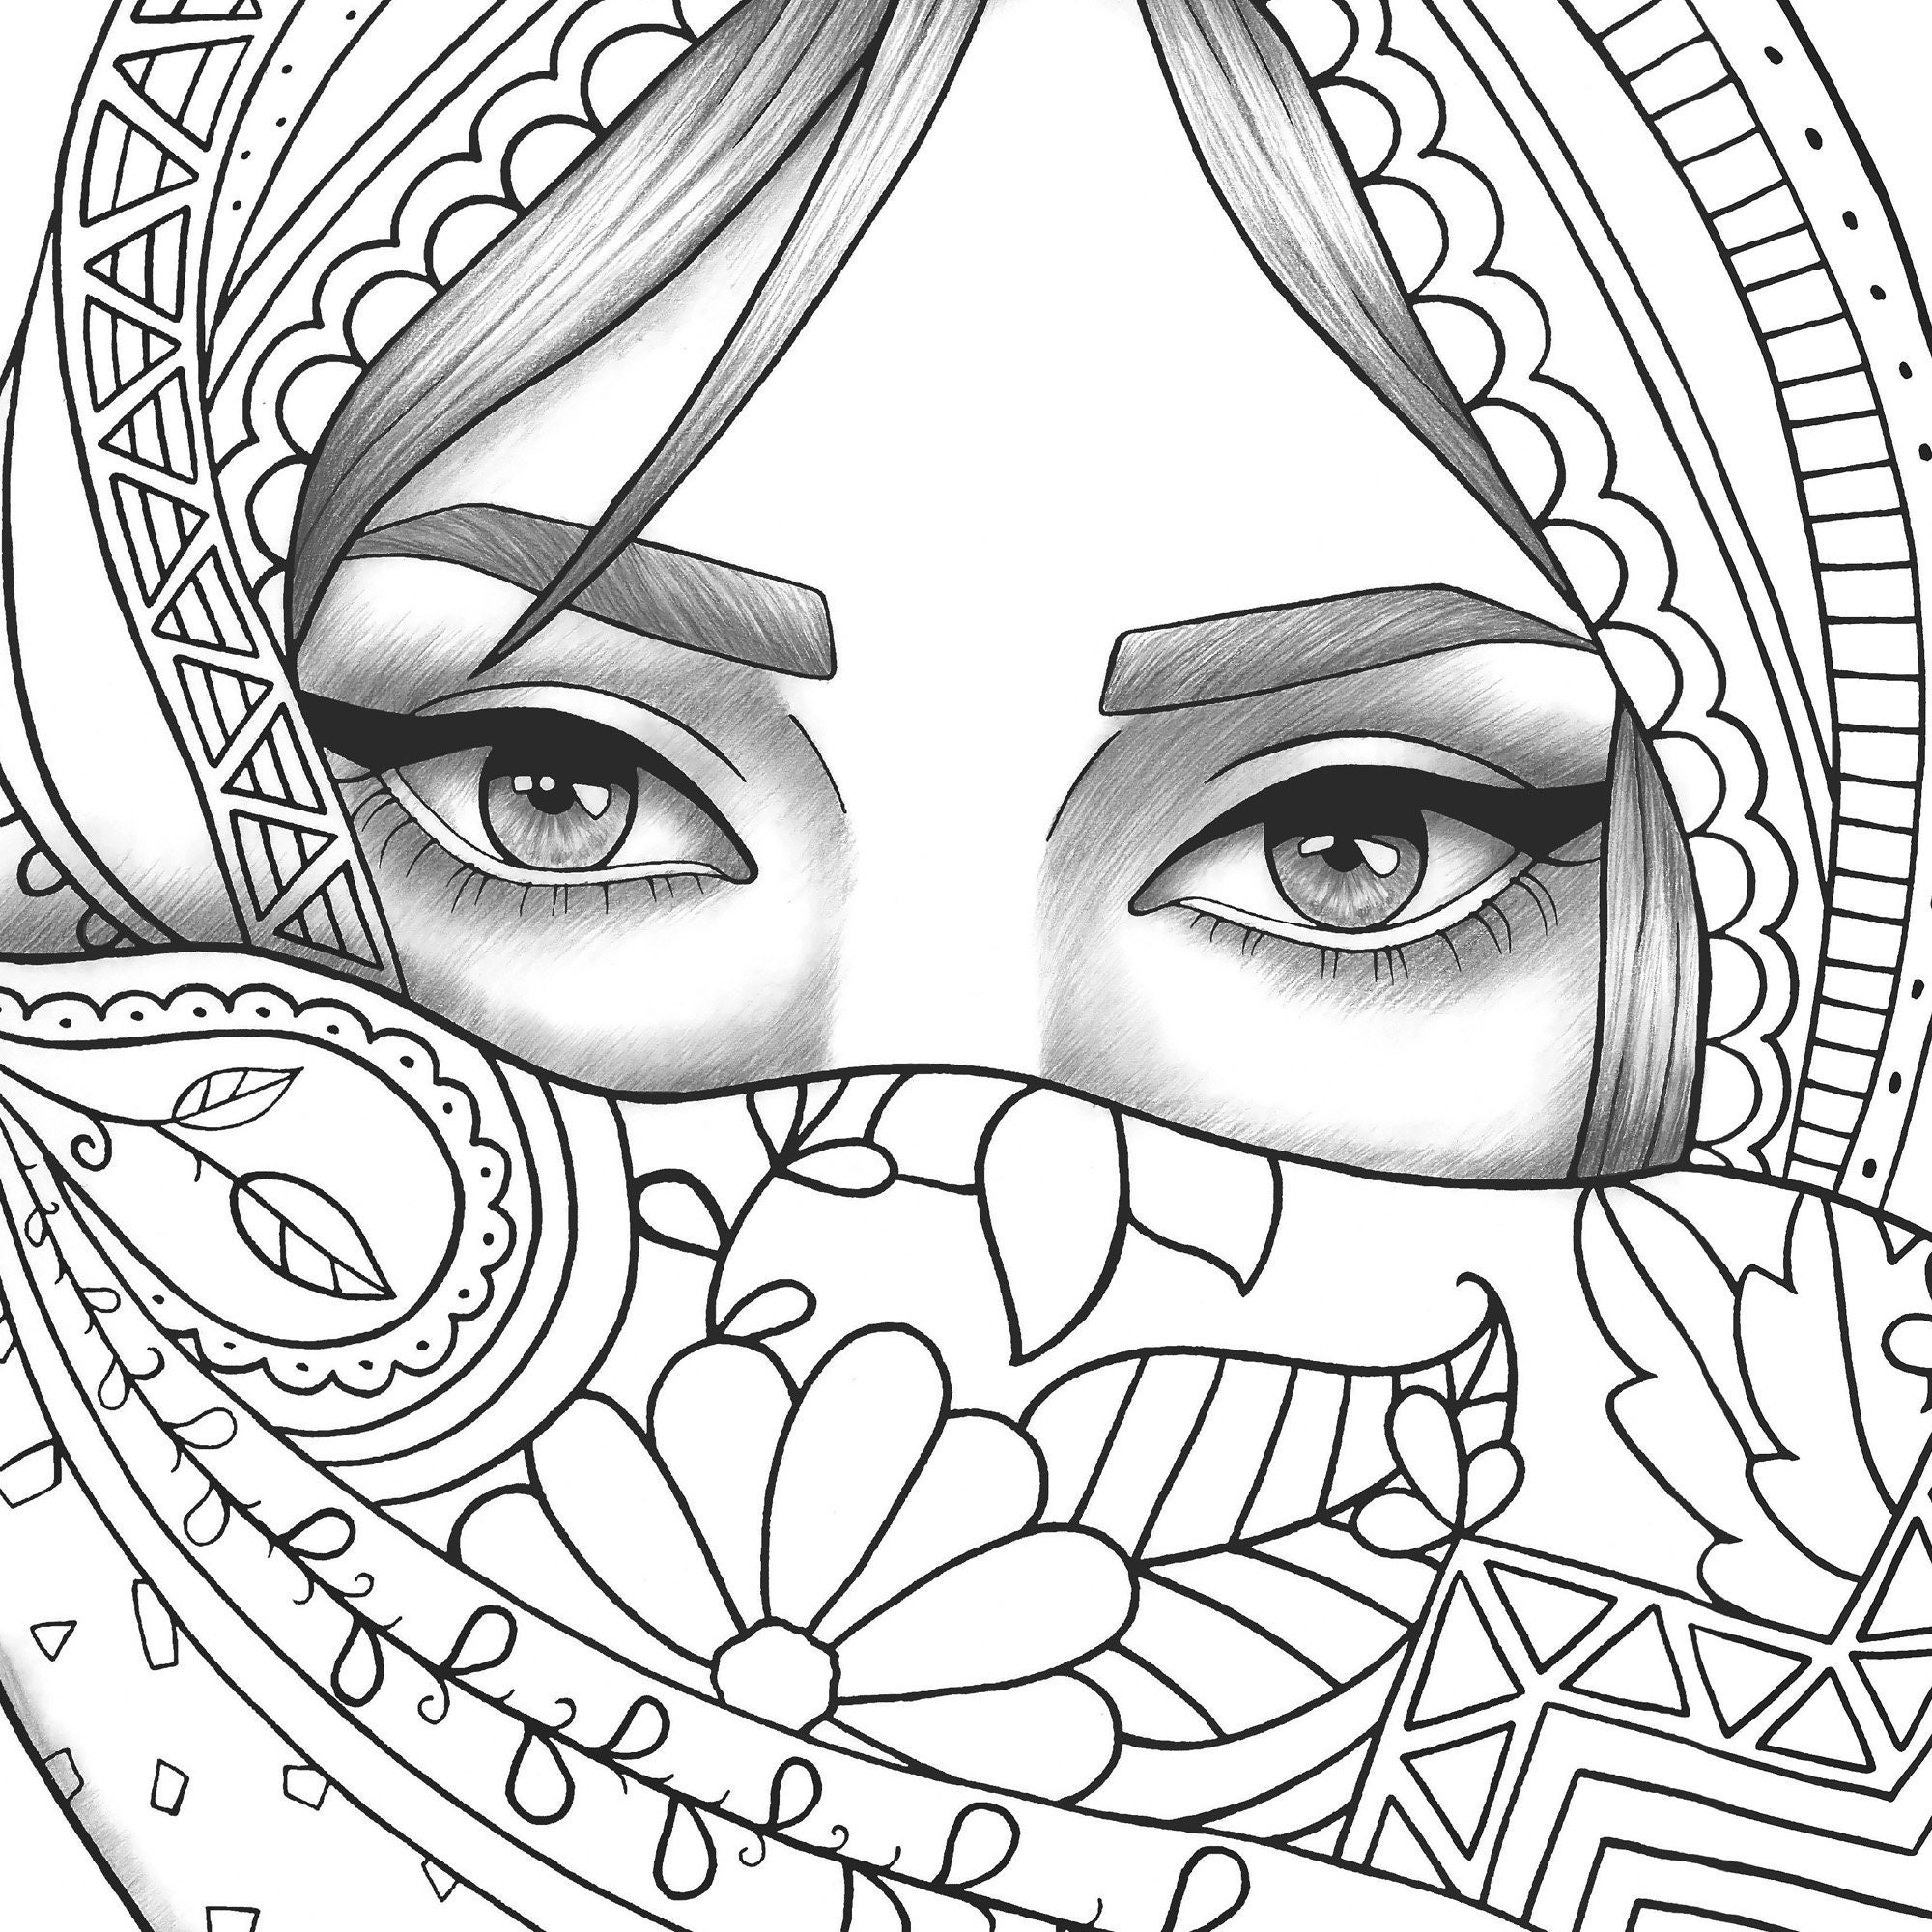 Coloring Books For Adults Pdf Free Download Up To 12 854 Coloring Pages For Free Download